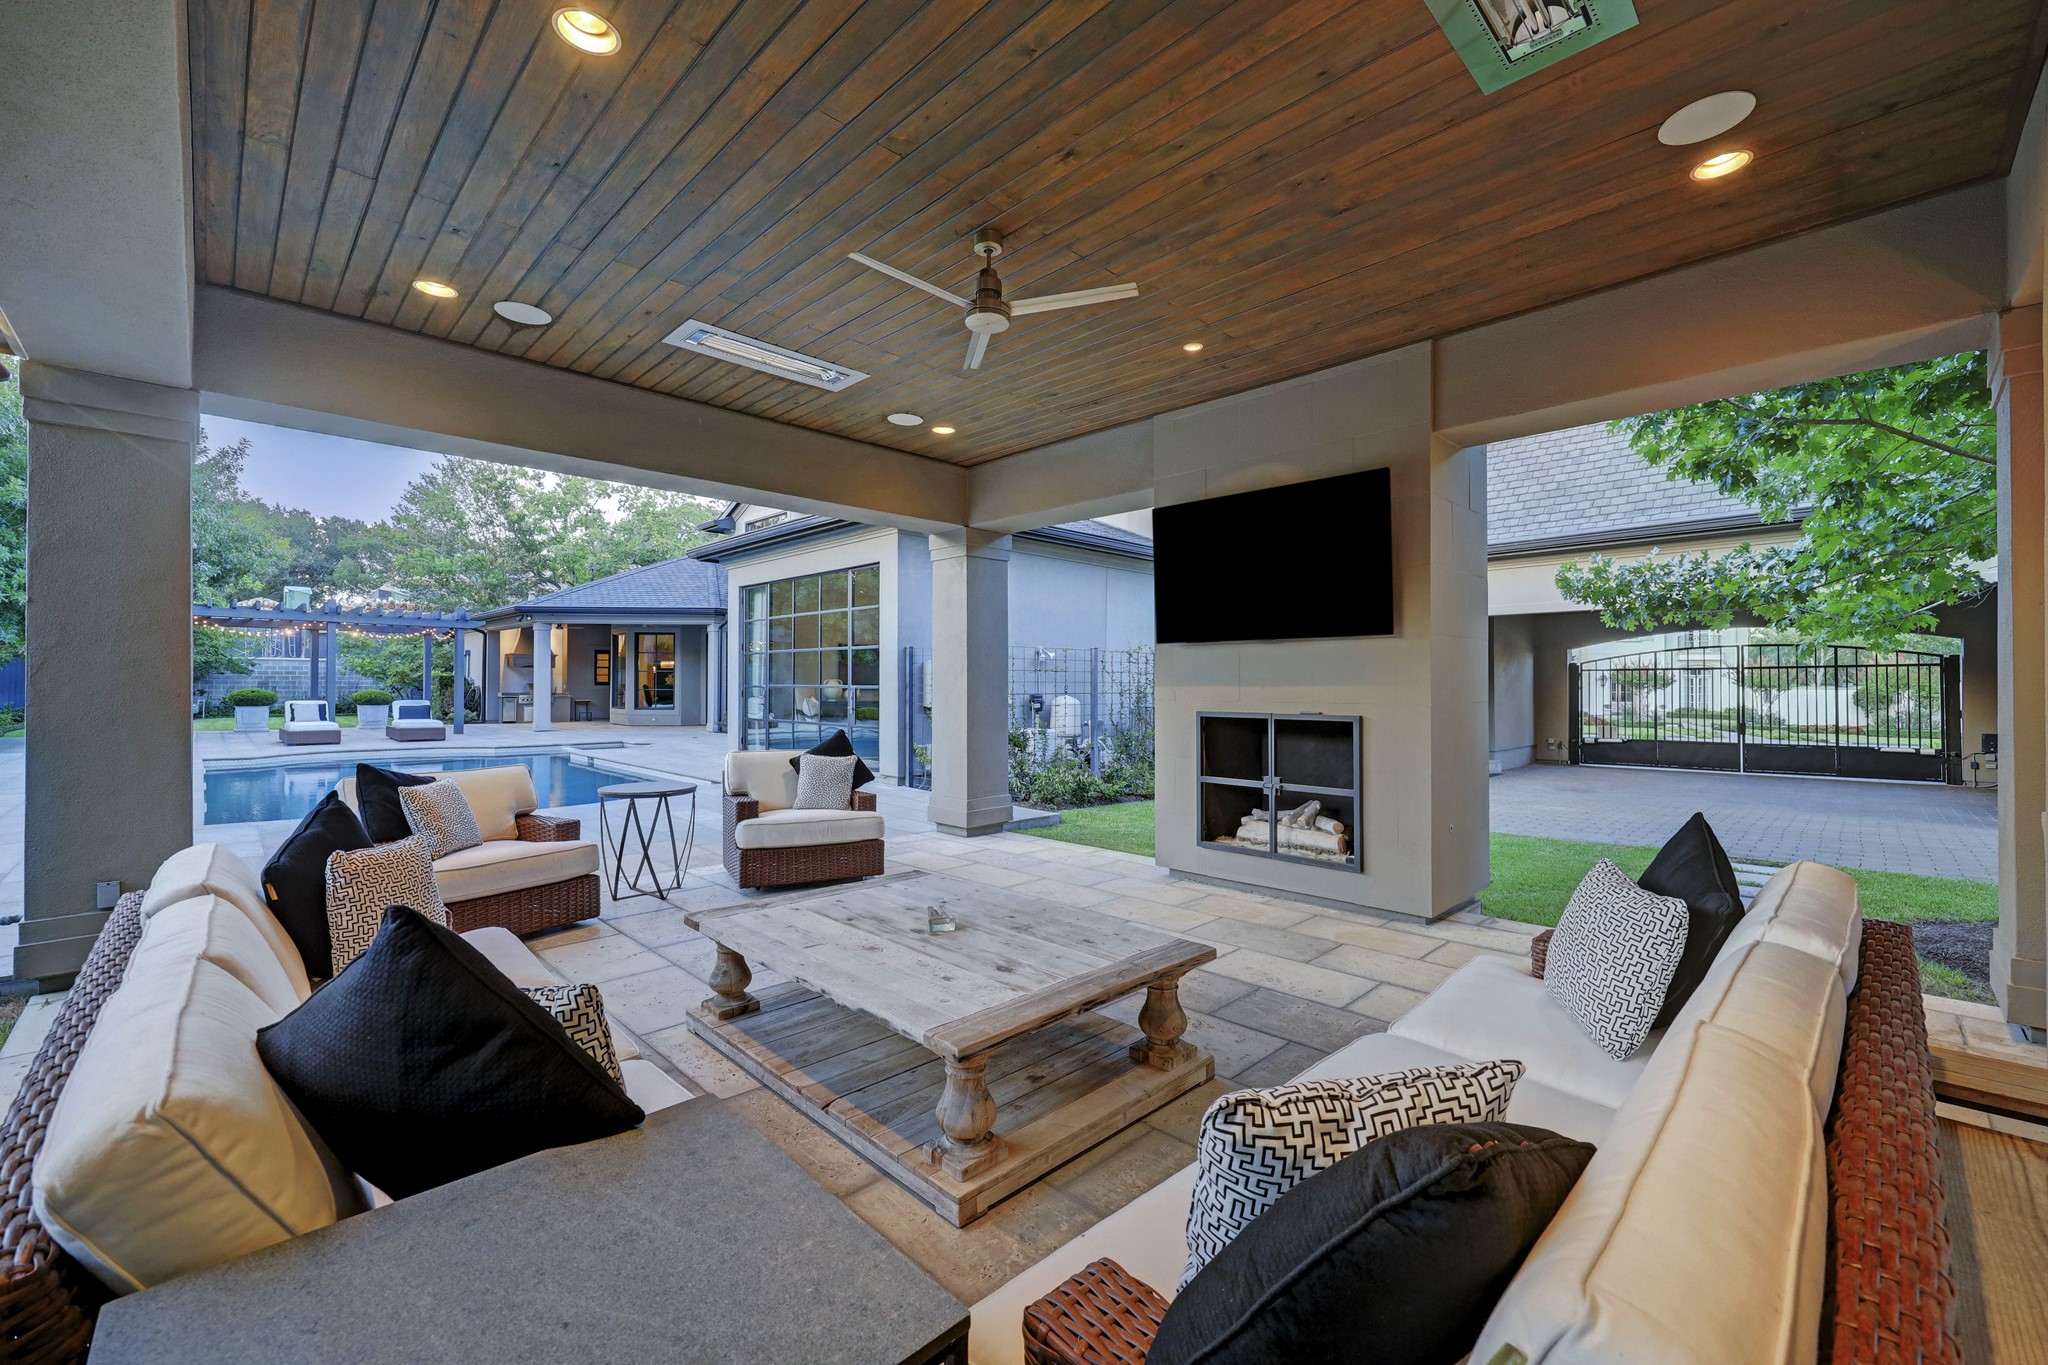 A stunning covered outdoor living area with a wood burning fireplace grants room to relax and entertain guests – the same reclaimed cherry wood floors from the guest quarters on the ceiling of this outdoor living space.